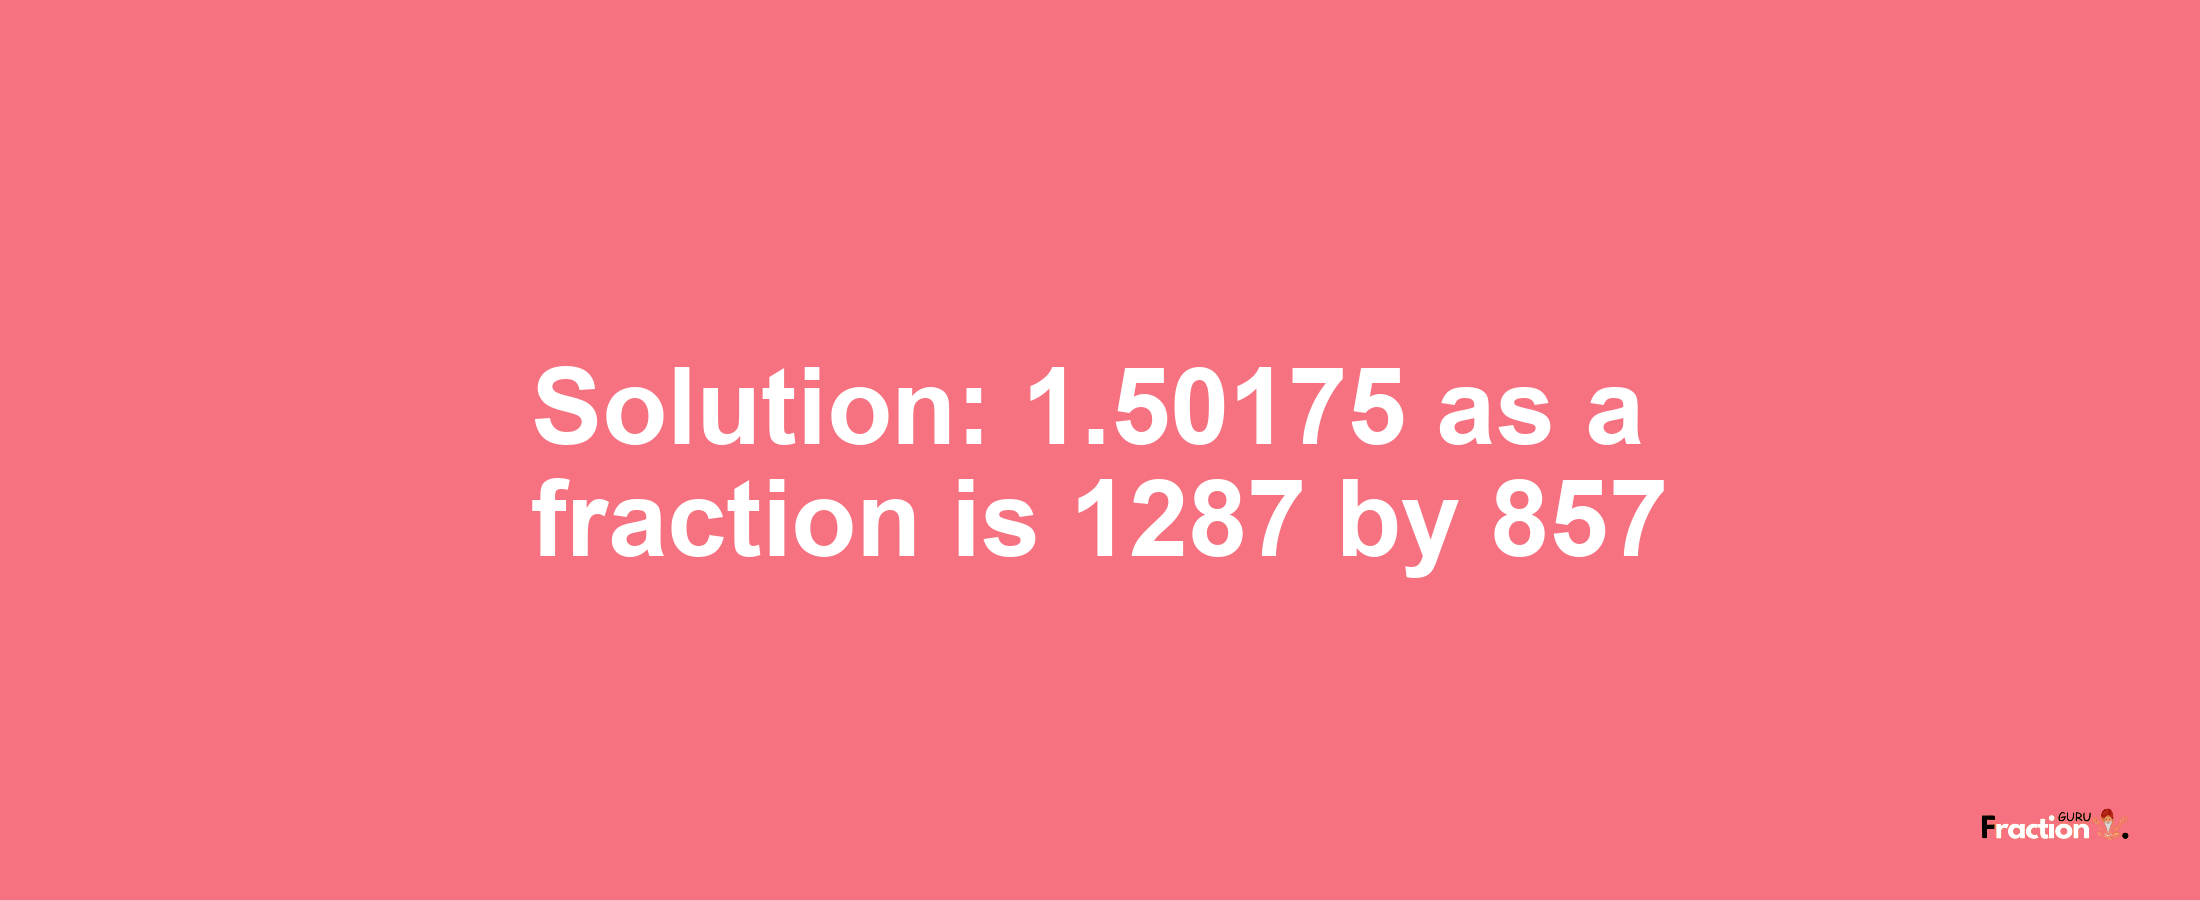 Solution:1.50175 as a fraction is 1287/857